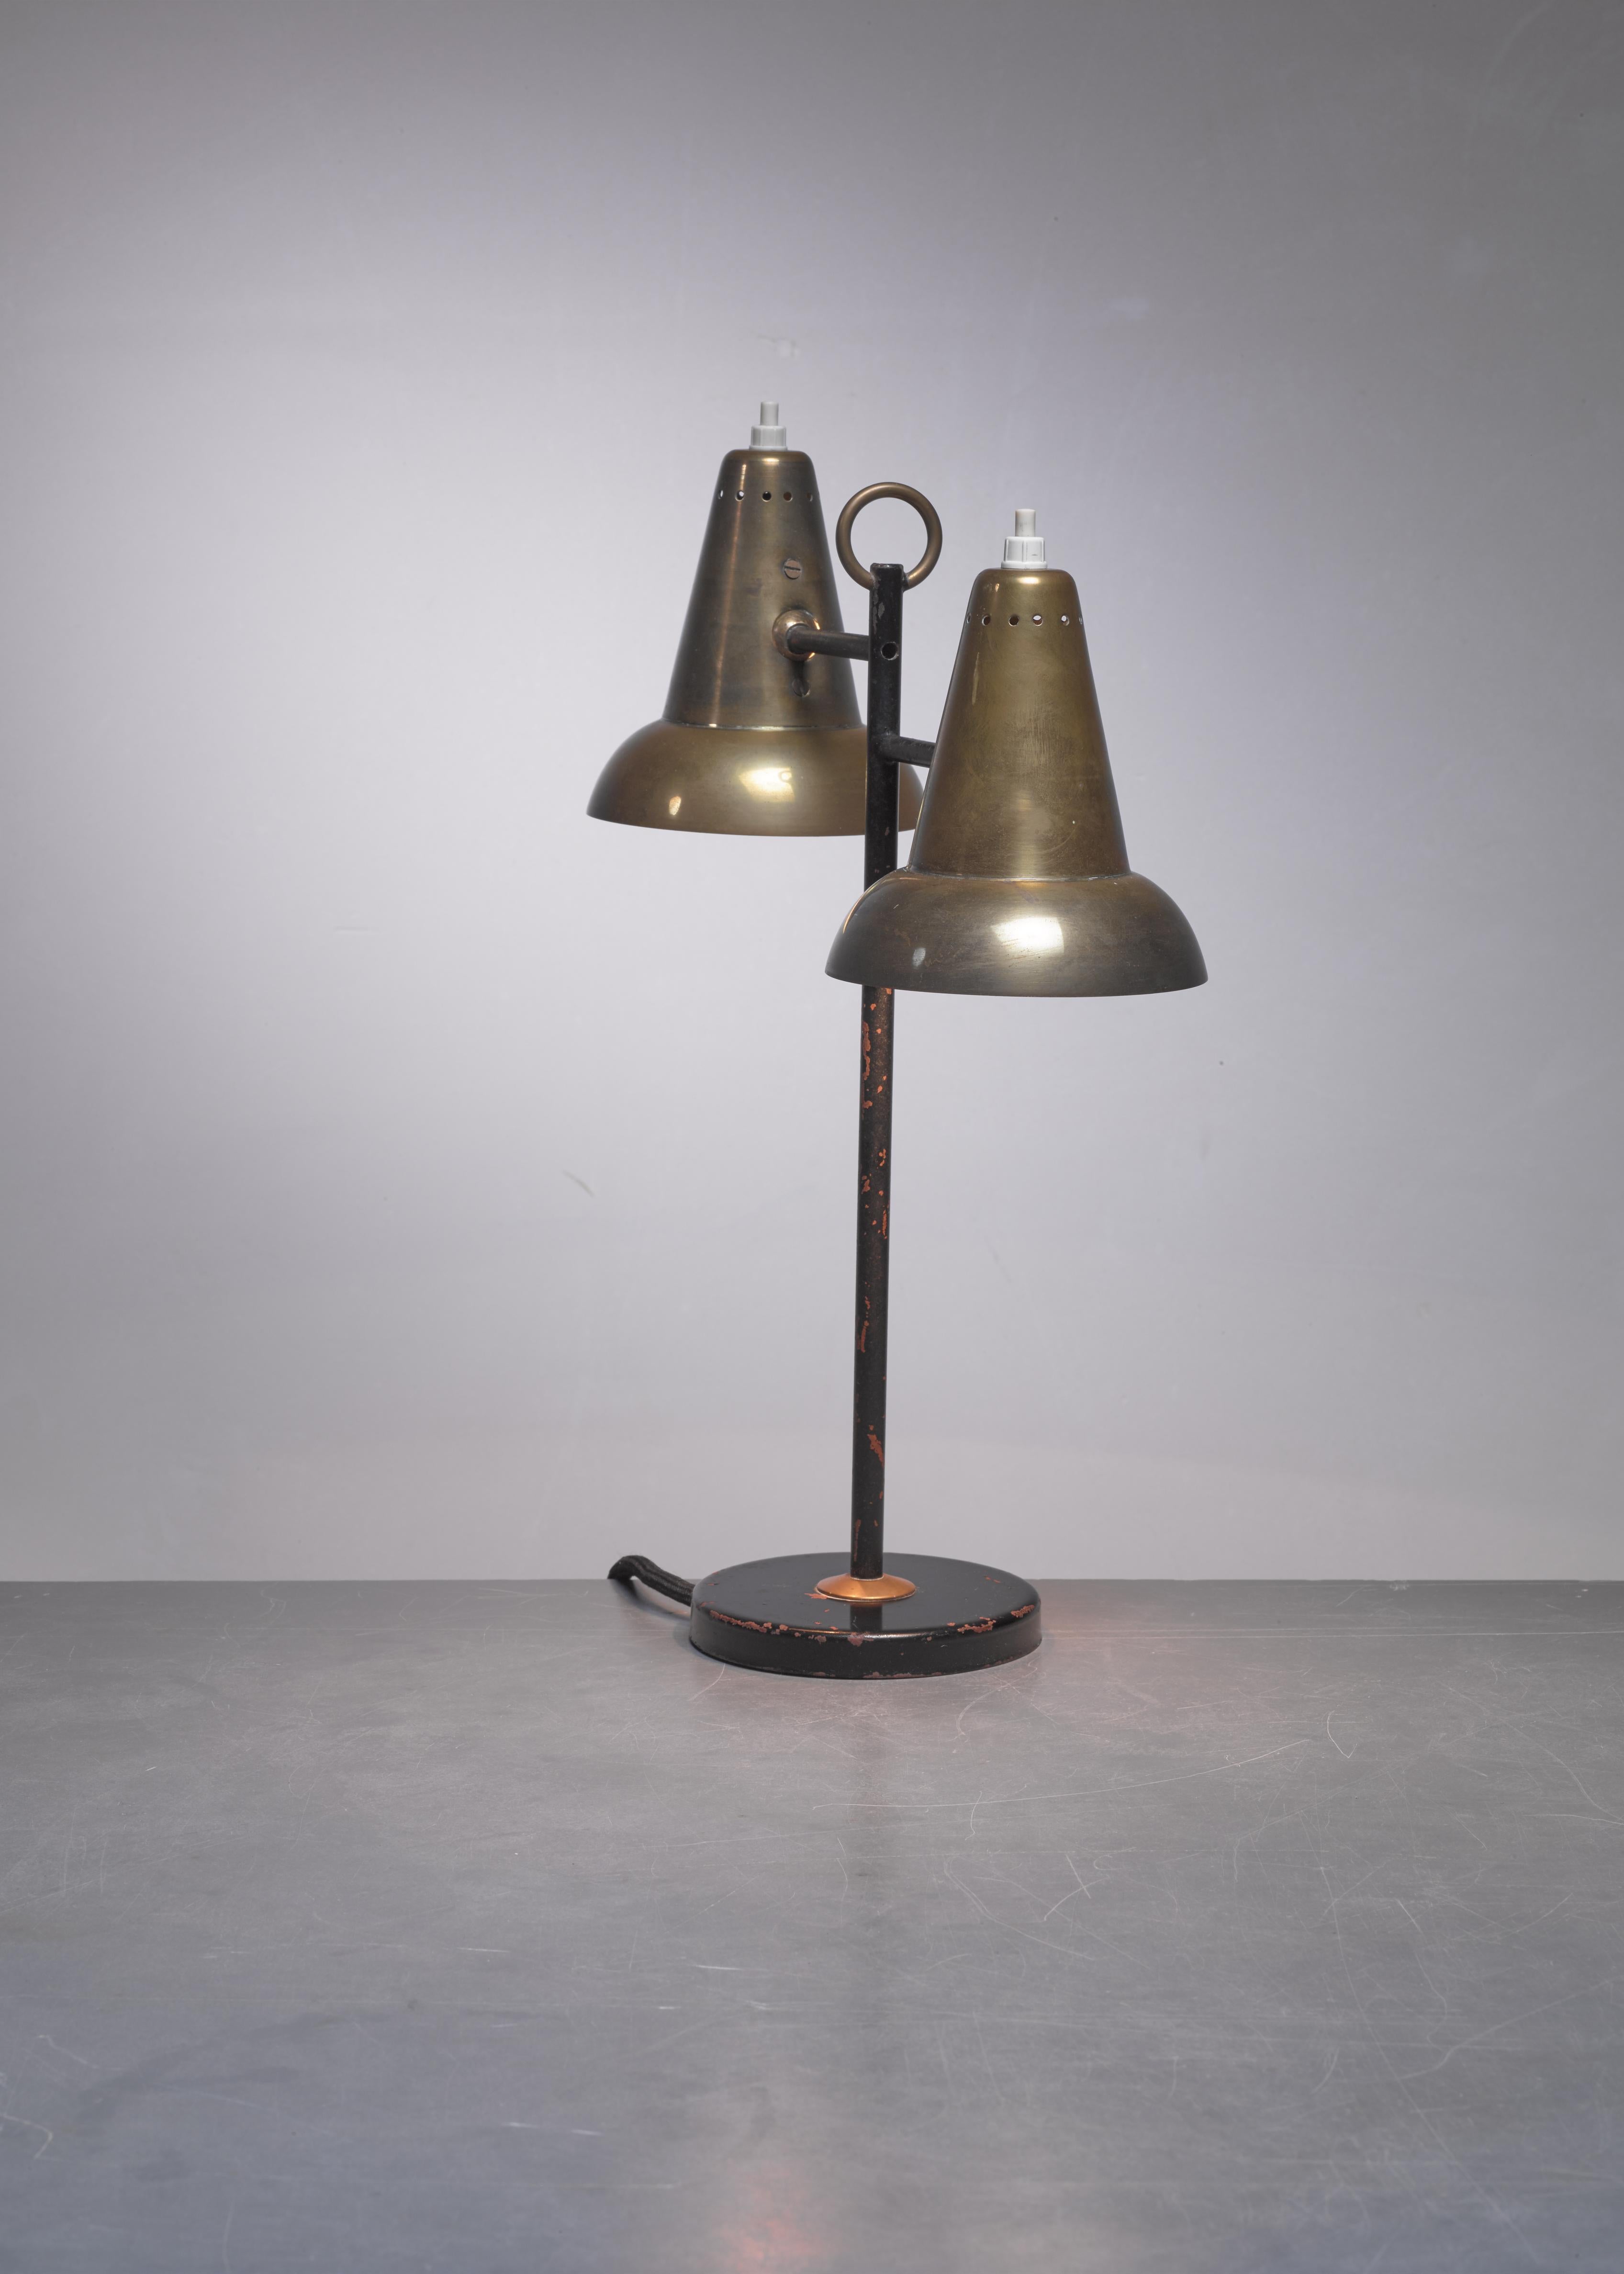 Lacquered Metal and Brass Table Lamps with Two Hoods, France, 1950s For Sale